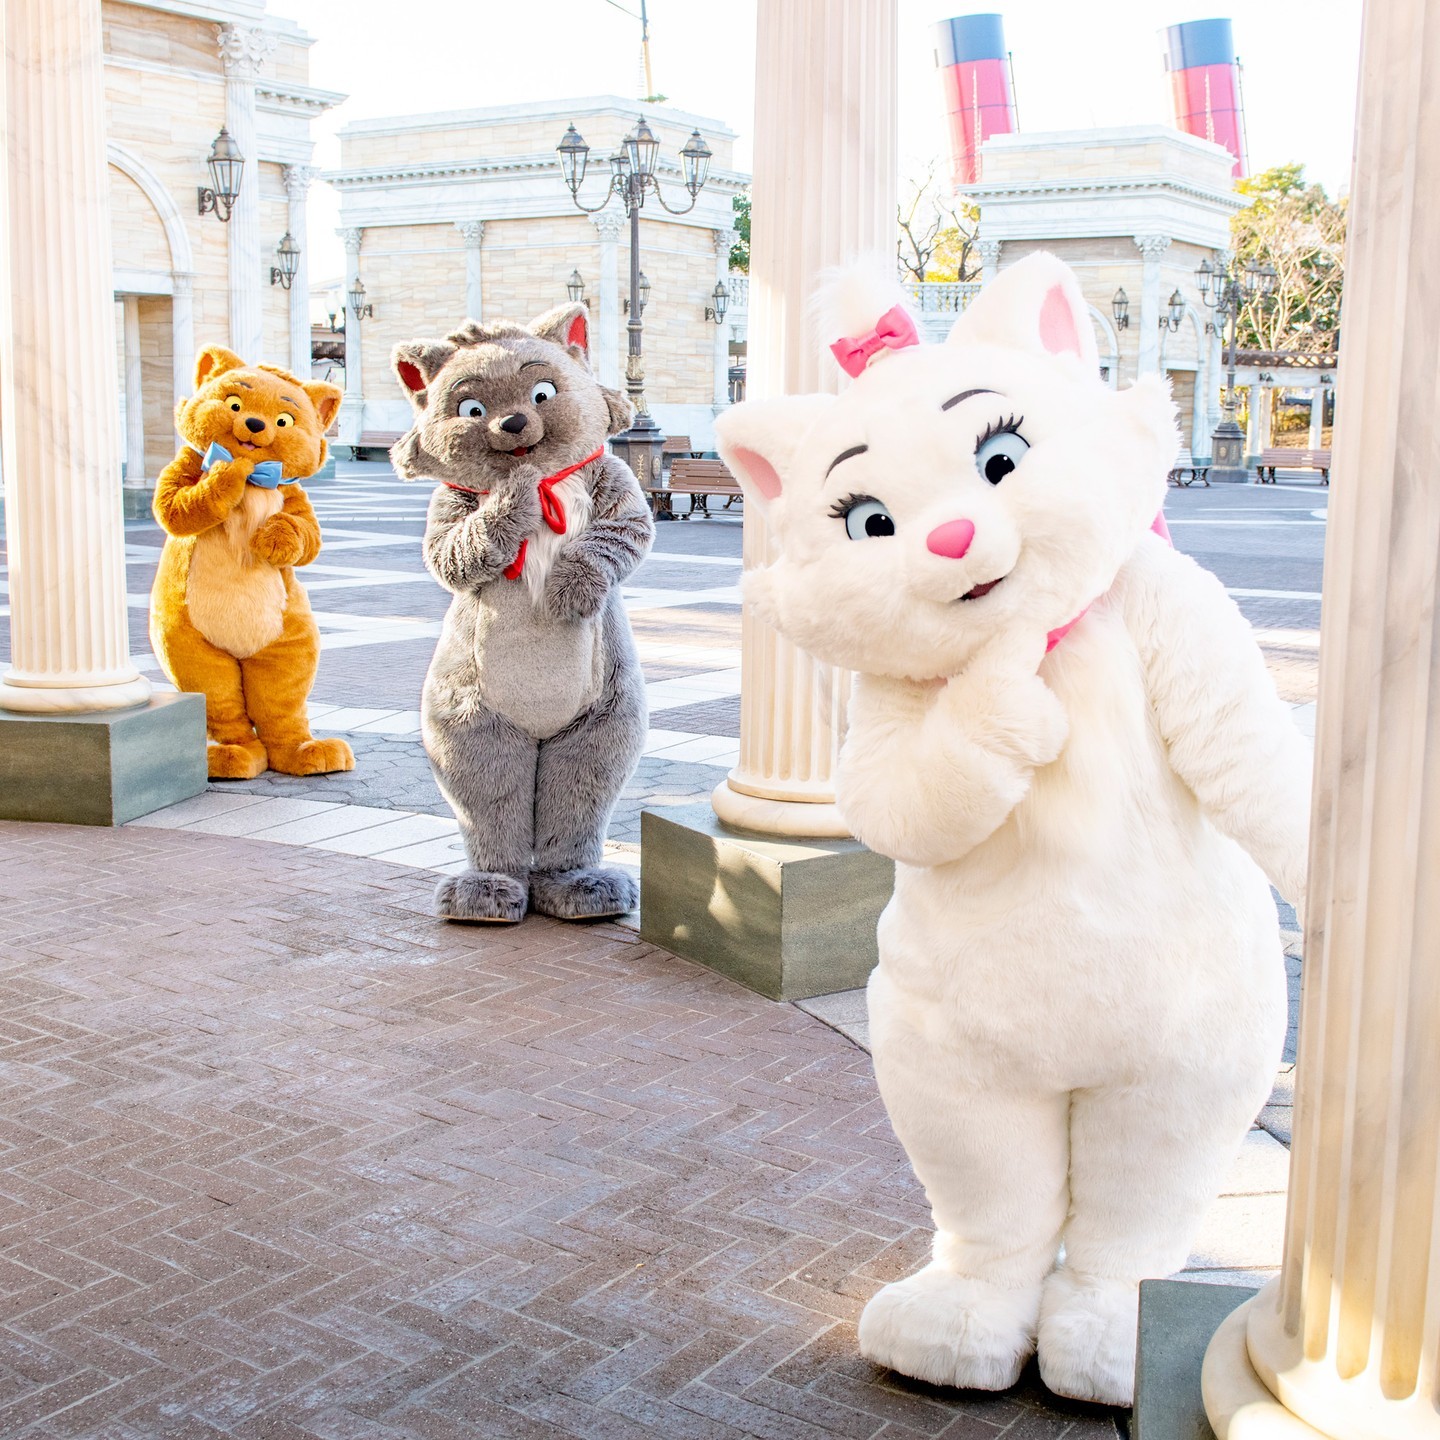 Cutie Cats!
にゃんにゃんにゃん♪
#thearistocats #marie #berlioz #toulouse #americanwaterfront...のイメージ